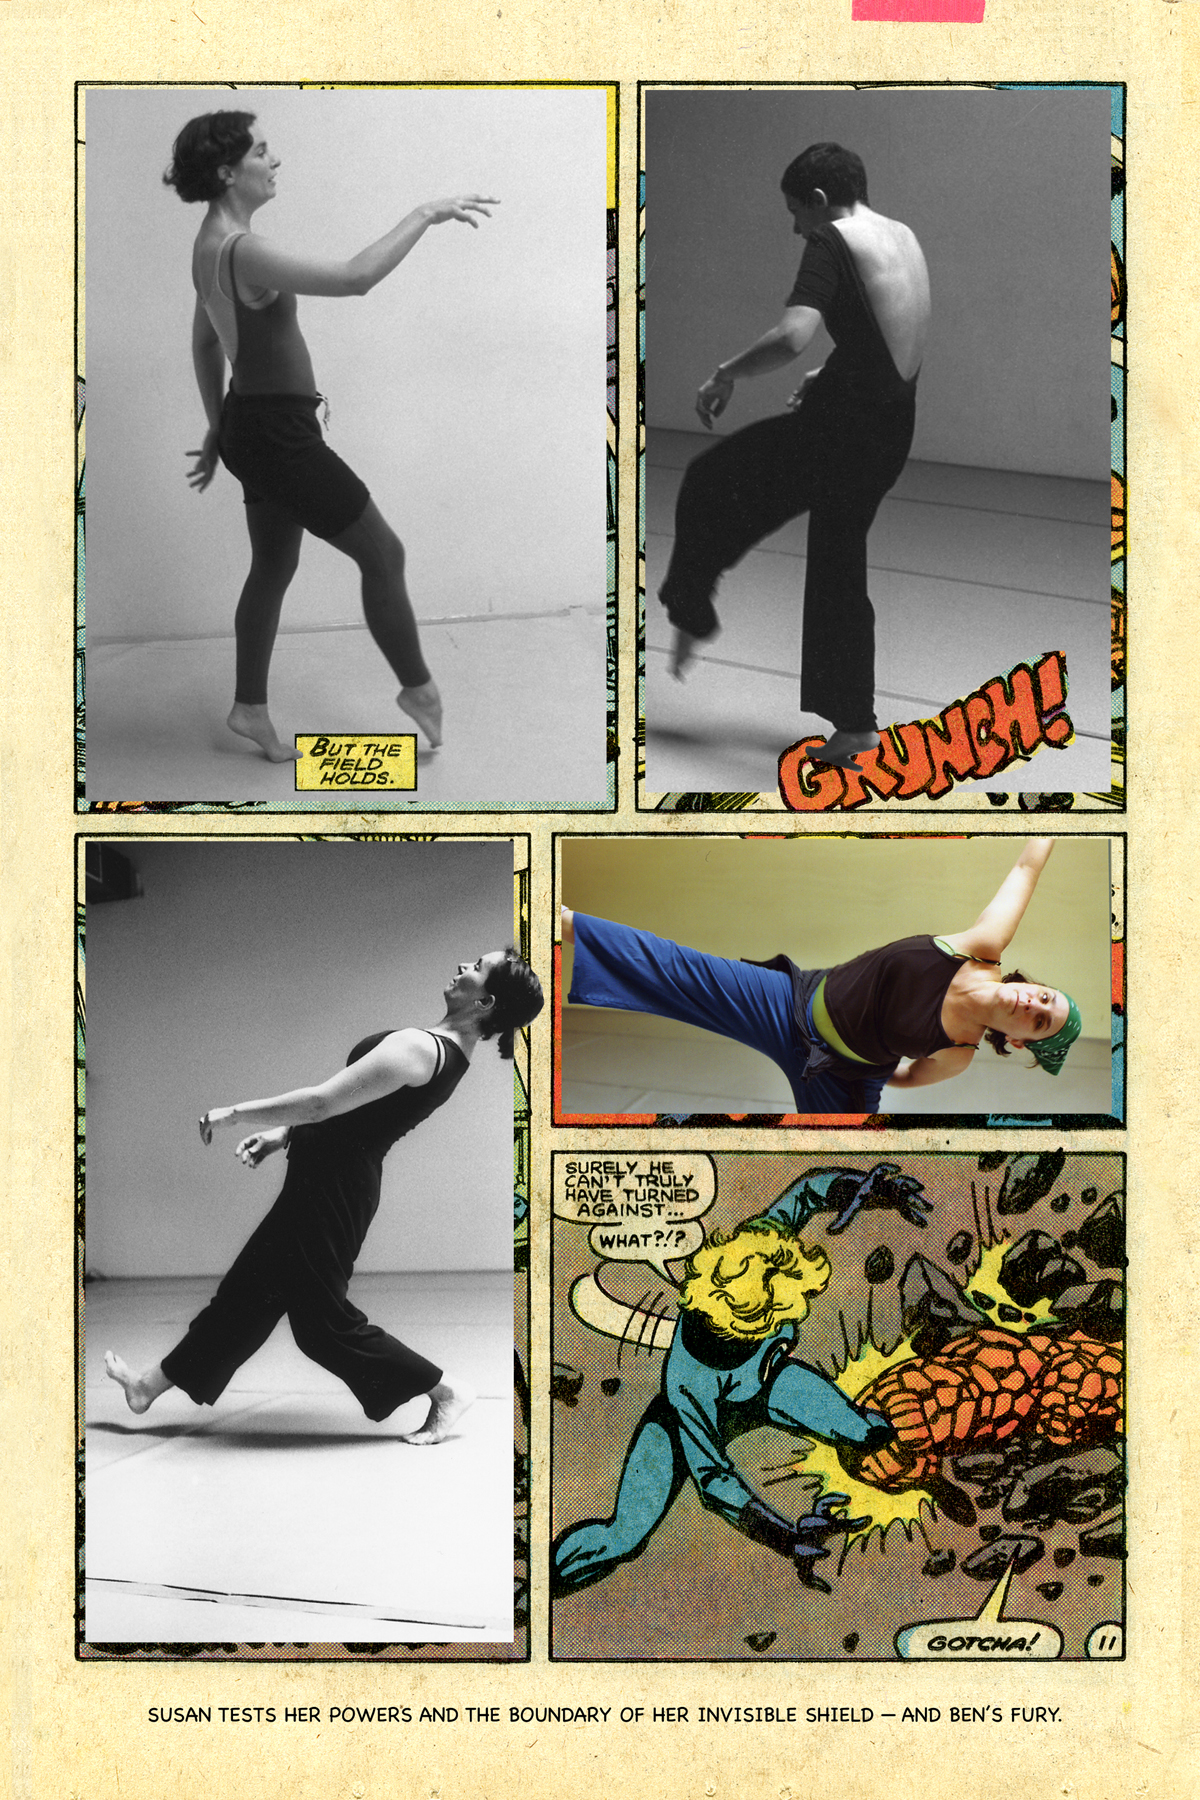 A page from a comic book that has a dancer dancing